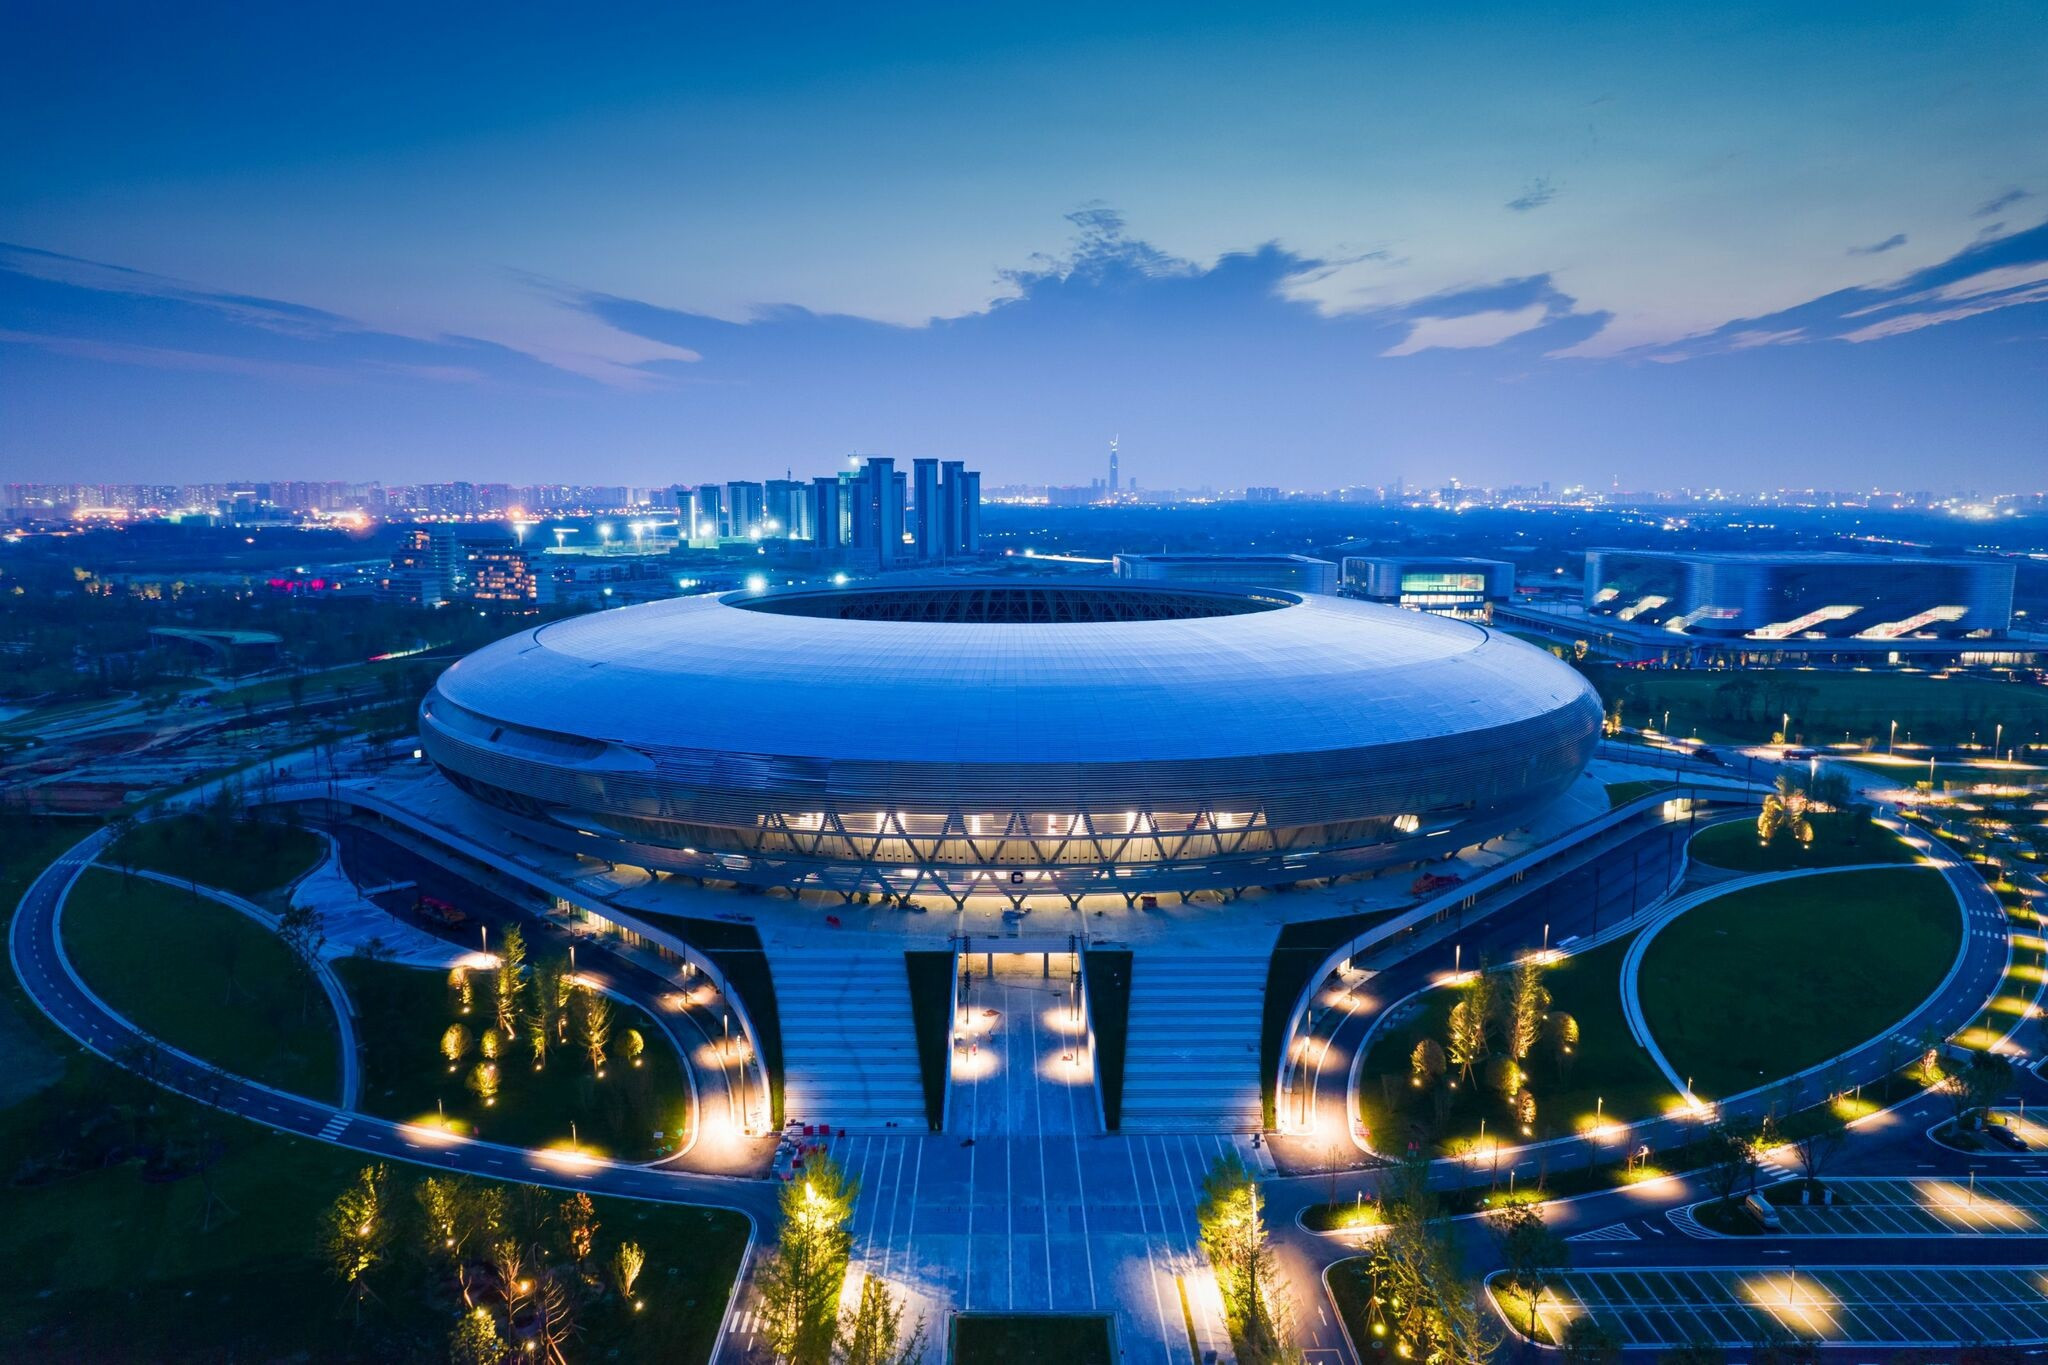 The Dong'an Lake Sports Park was the venue for the Chengdu 2021 Opening Ceremony ©Chengdu 2021